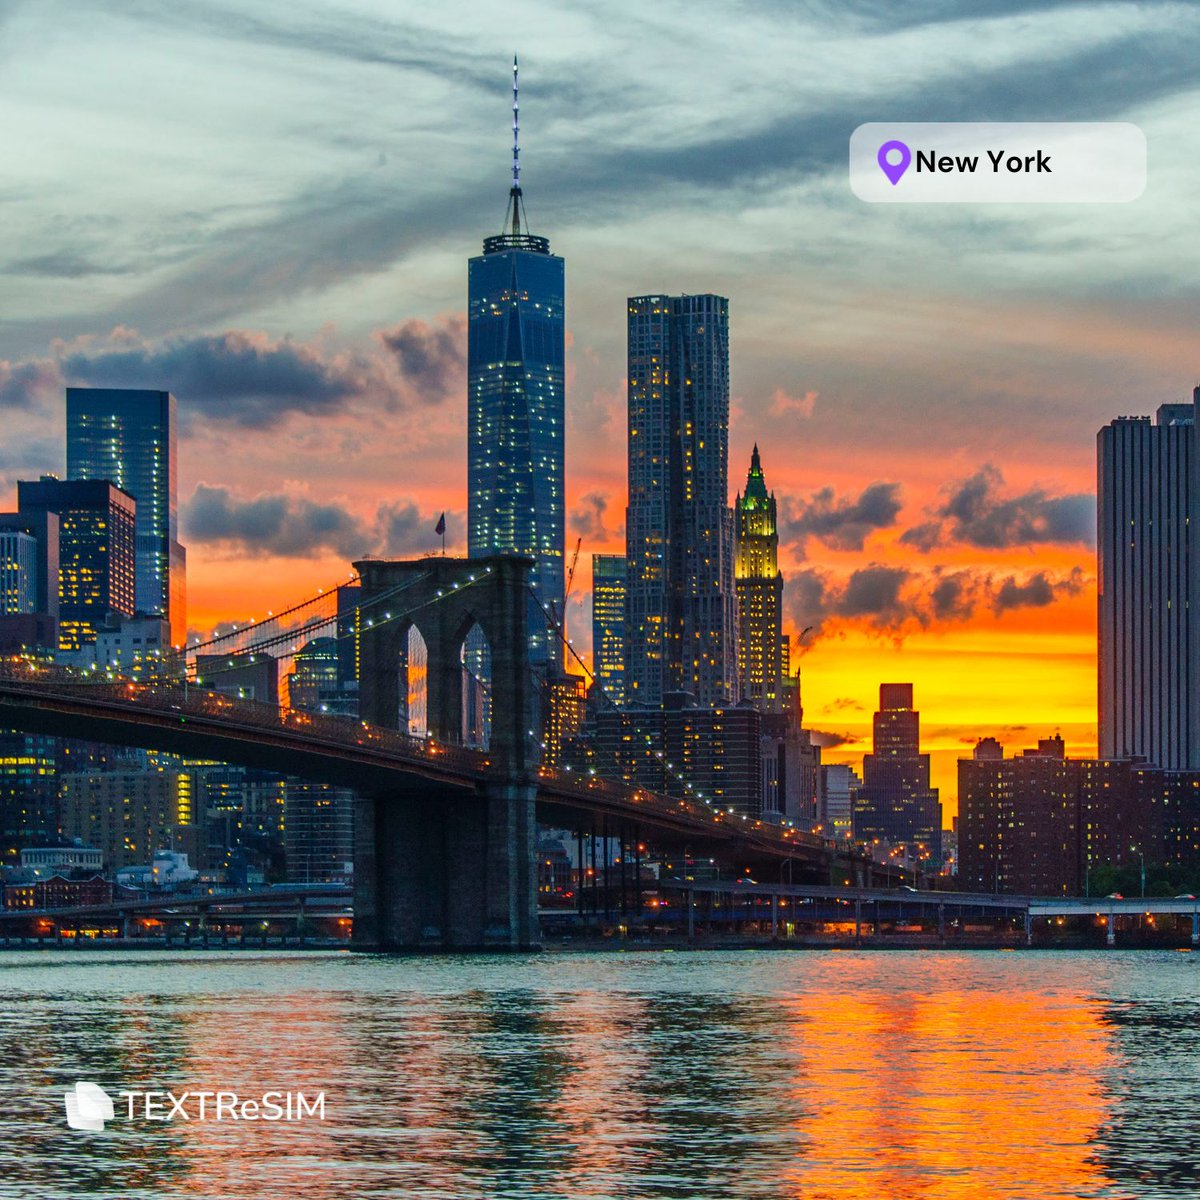 Explore America! 🇺🇸 From the grandeur of Grand Canyon ⛰ to the skyscrapers in New York🗽, experience 😄 all that this great nation has to offer on an unforgettable journey across the United States. 
🎊 Textr eSIM US data plan as low as $4.99. 
#unitedstates #dataplans #textresim